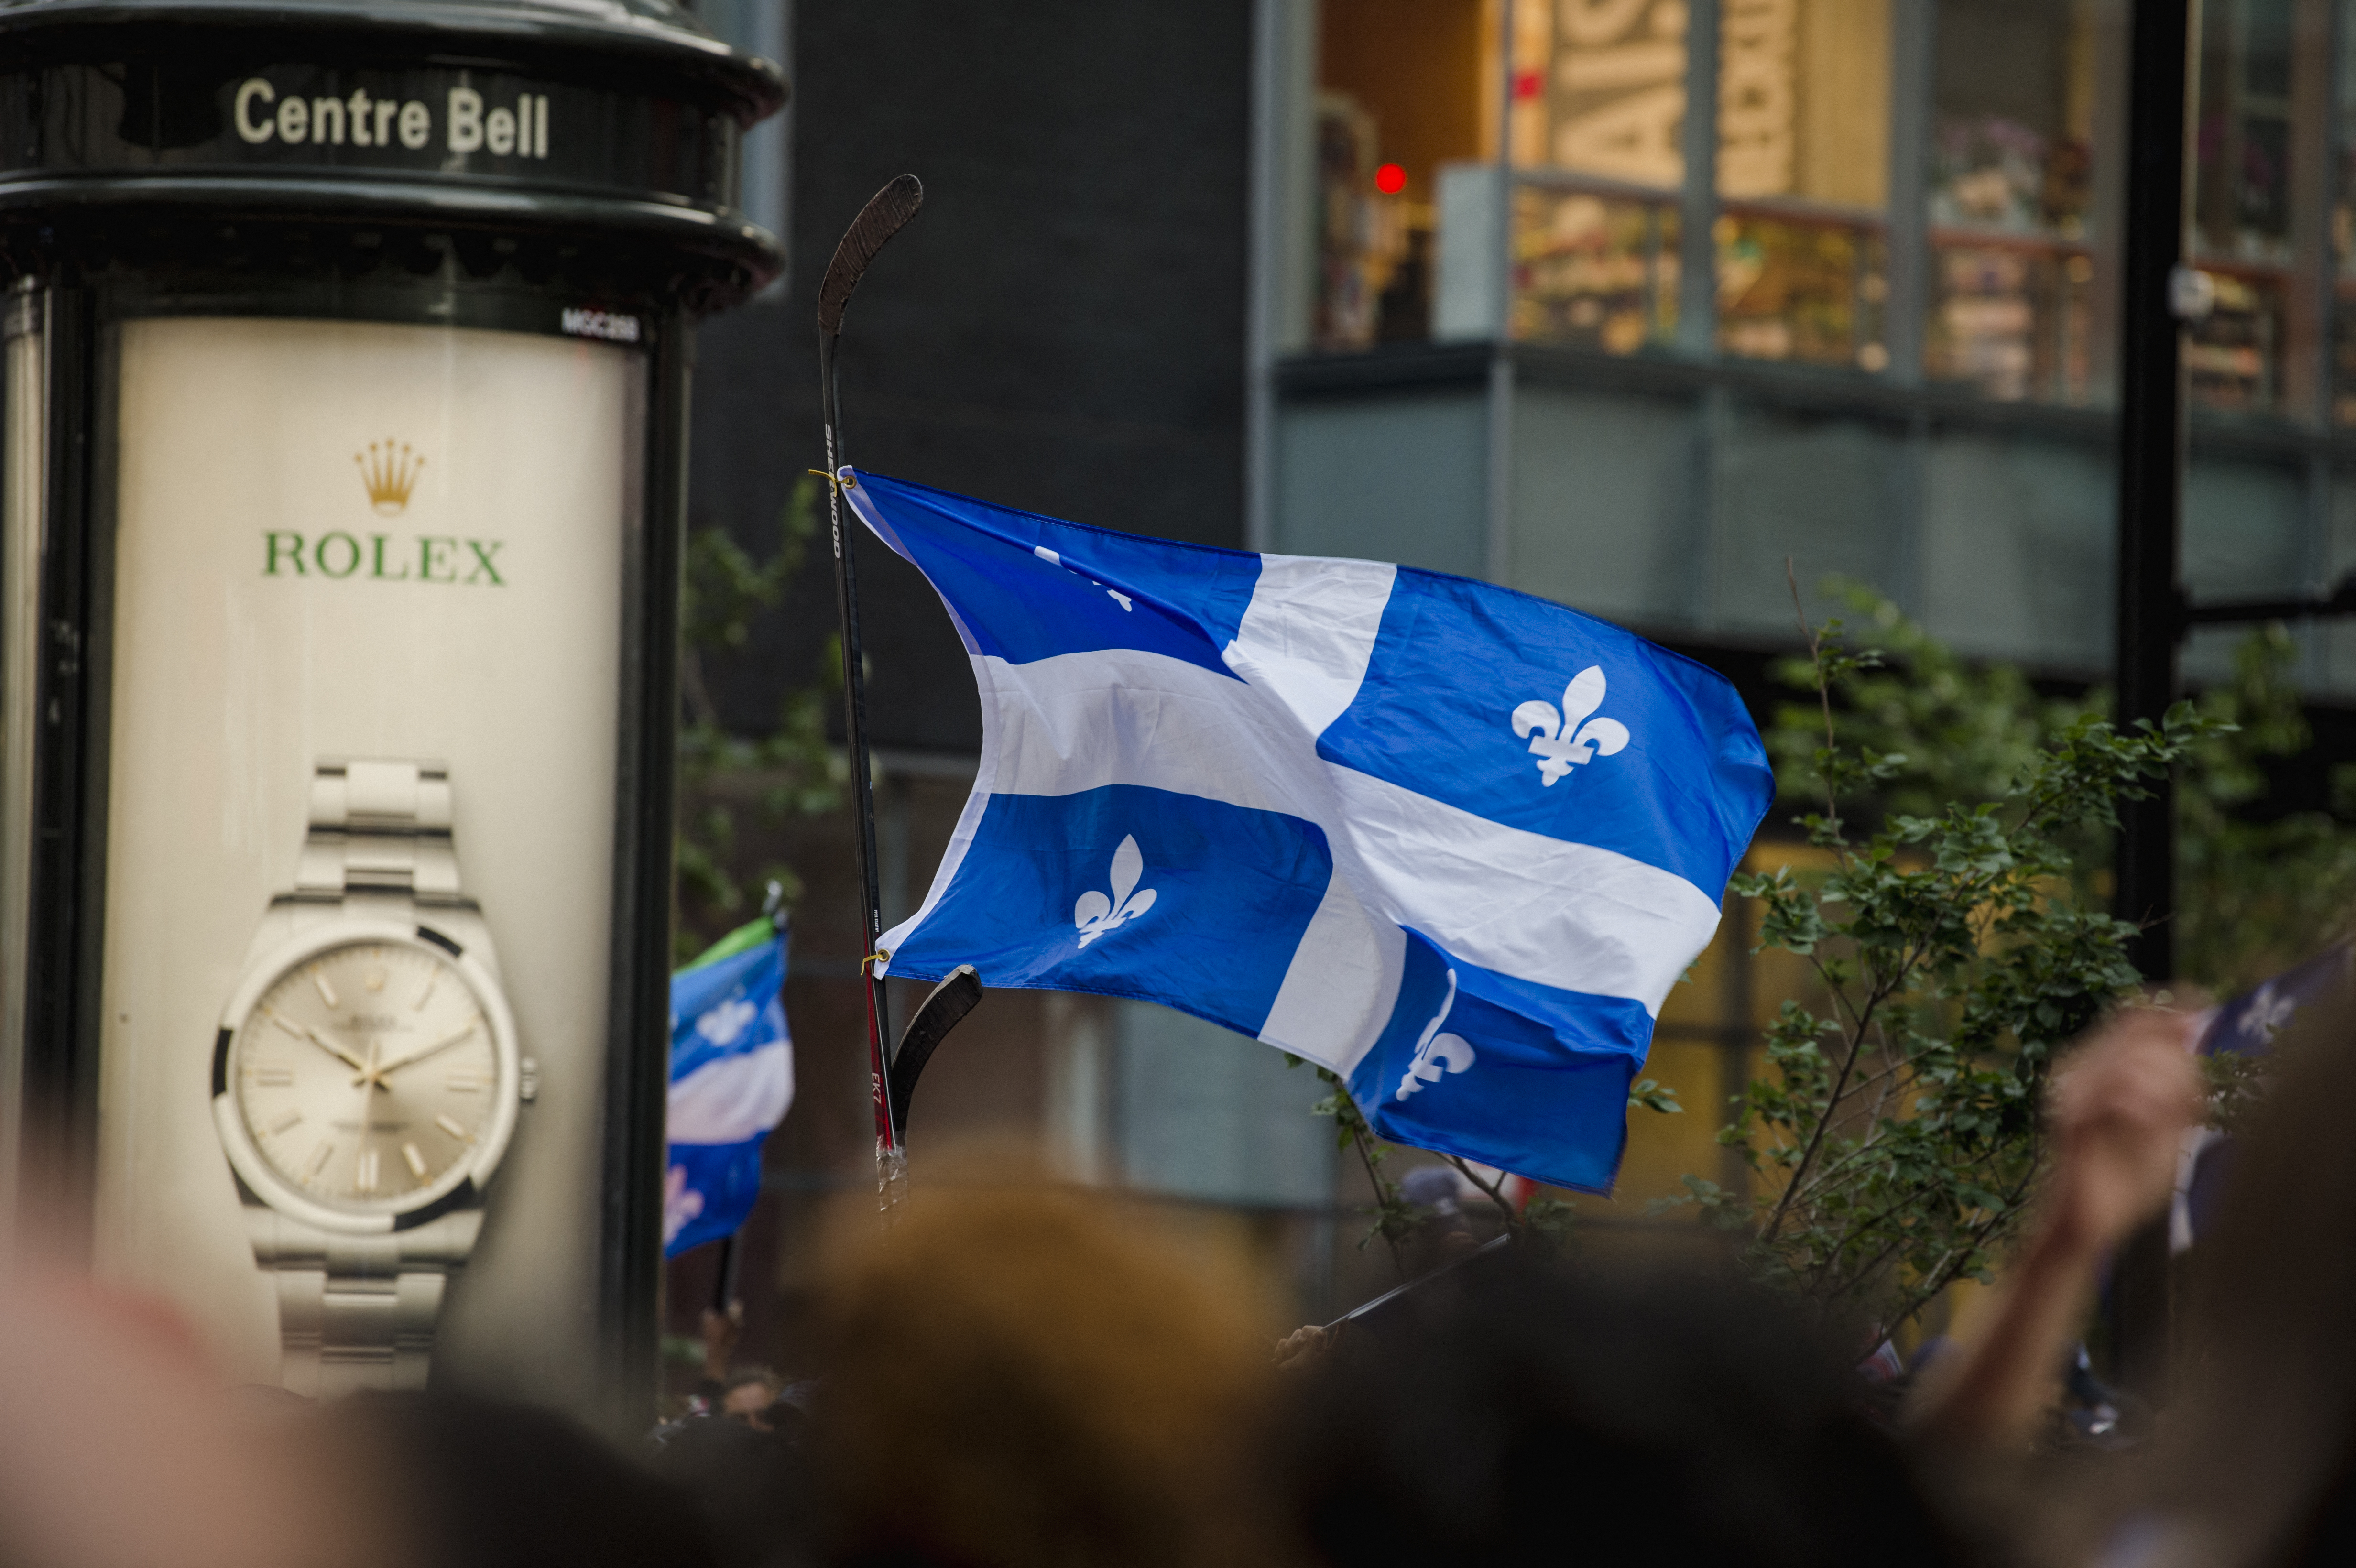 Reduced tuition fees for int’l students in Quebec universities and colleges